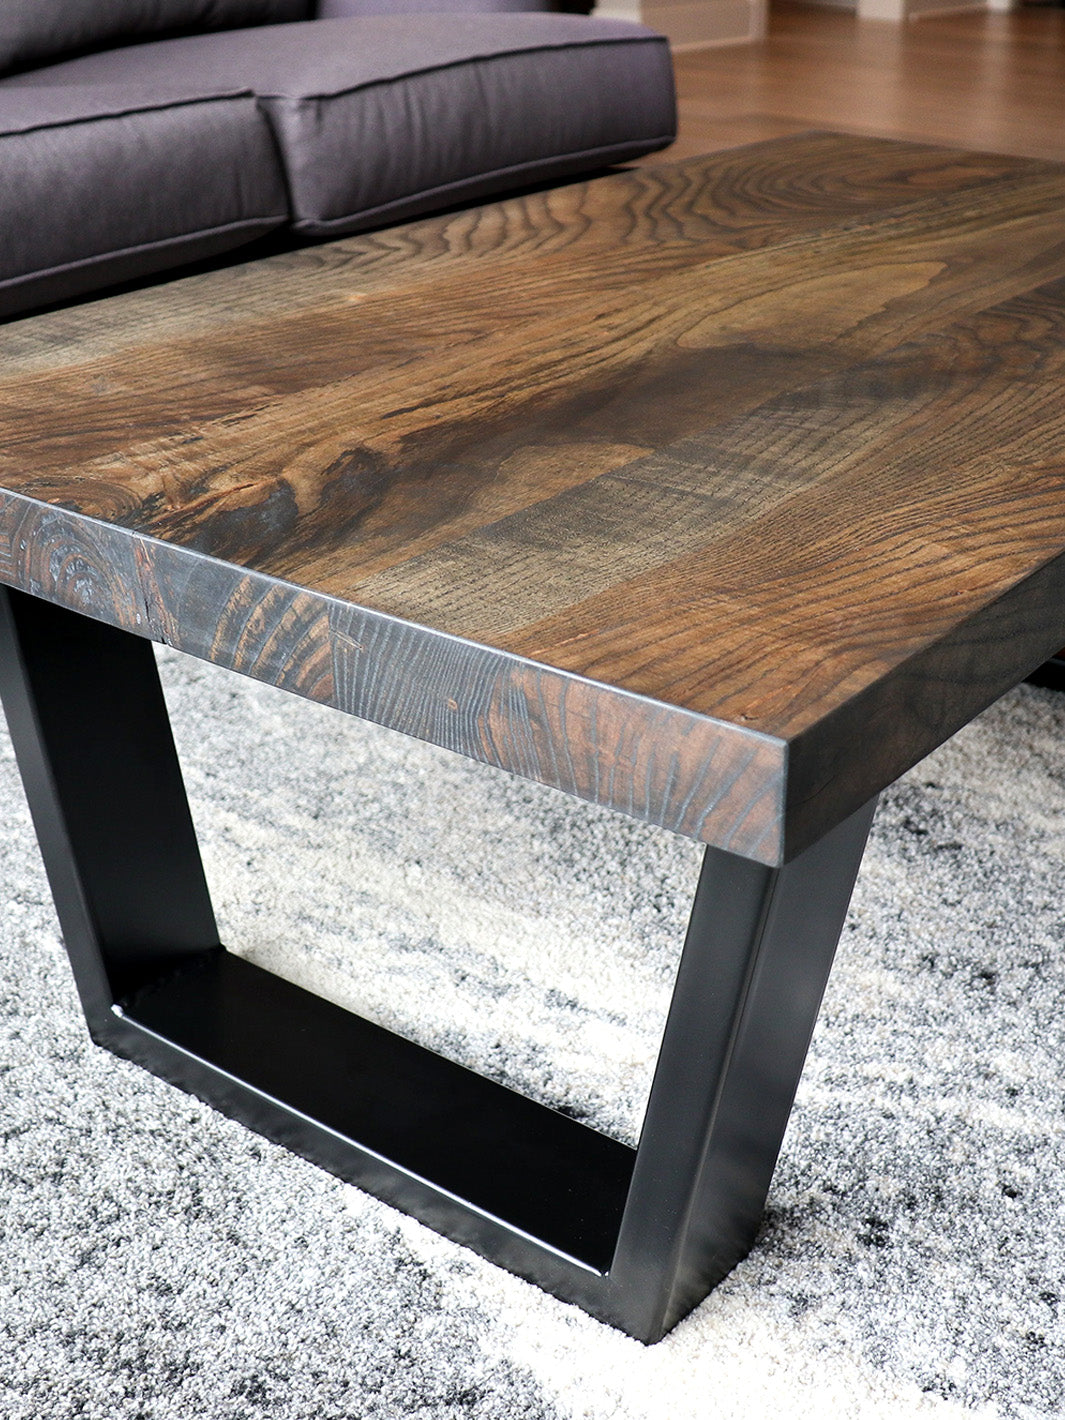 Modern Black Charcoal Ash Wood and Tapered Steel Coffee Table Earthly Comfort Coffee Tables 1578-2